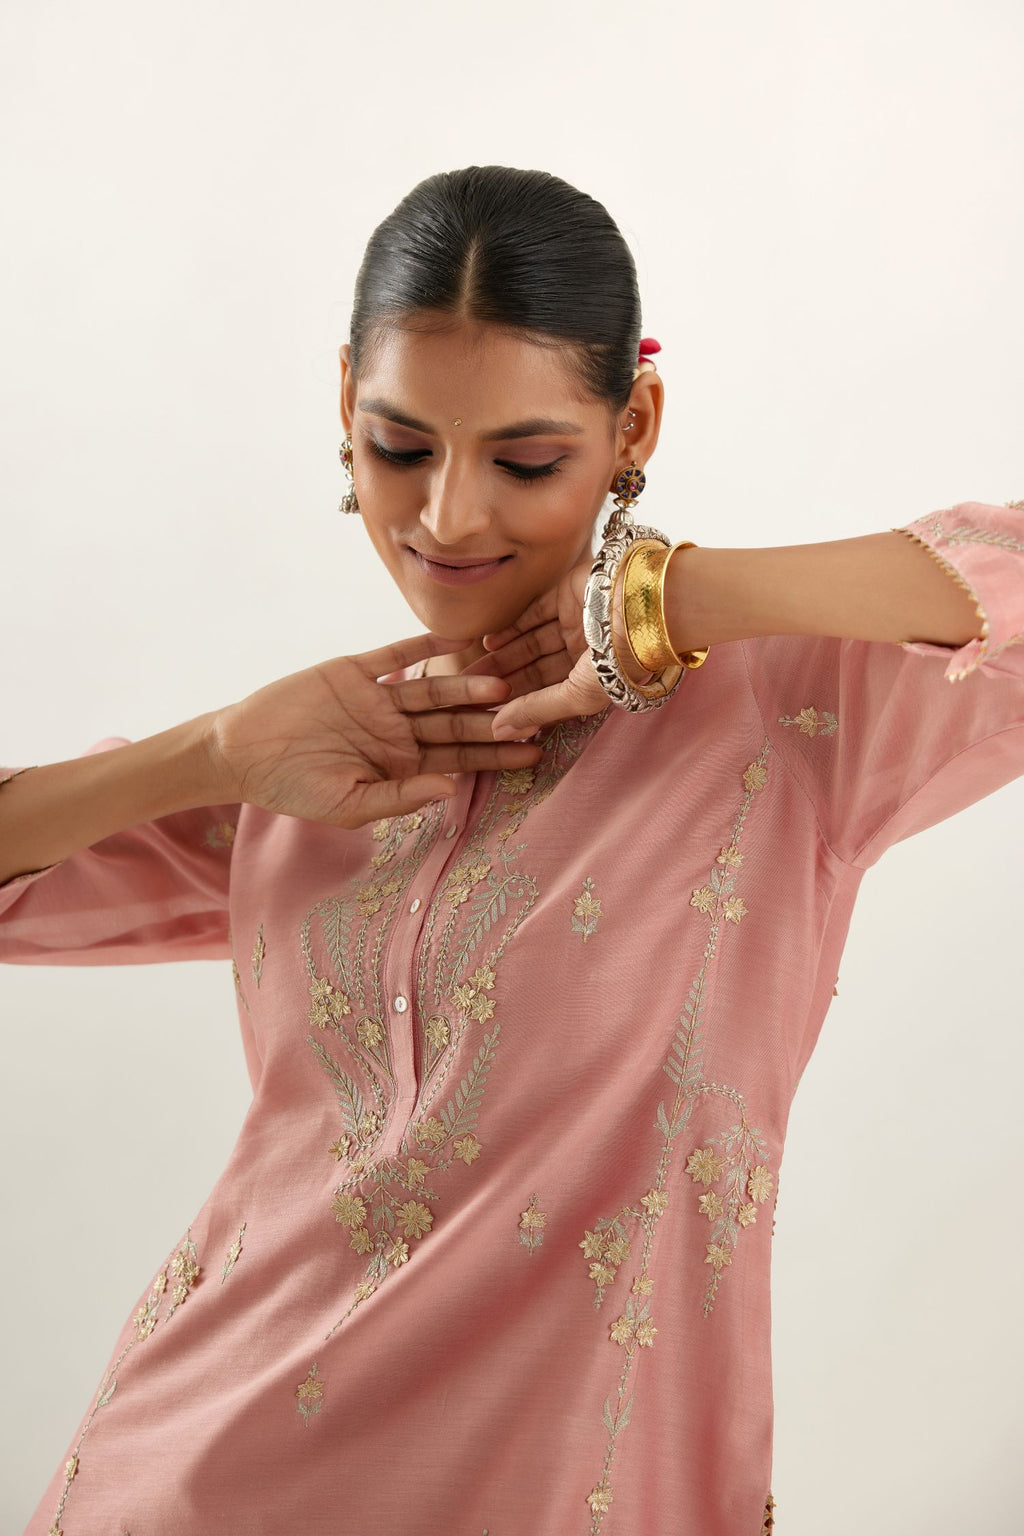 Pink silk chanderi straight kurta set with button placket neckline, highlighted with all-over gold gota and zari embroidery.